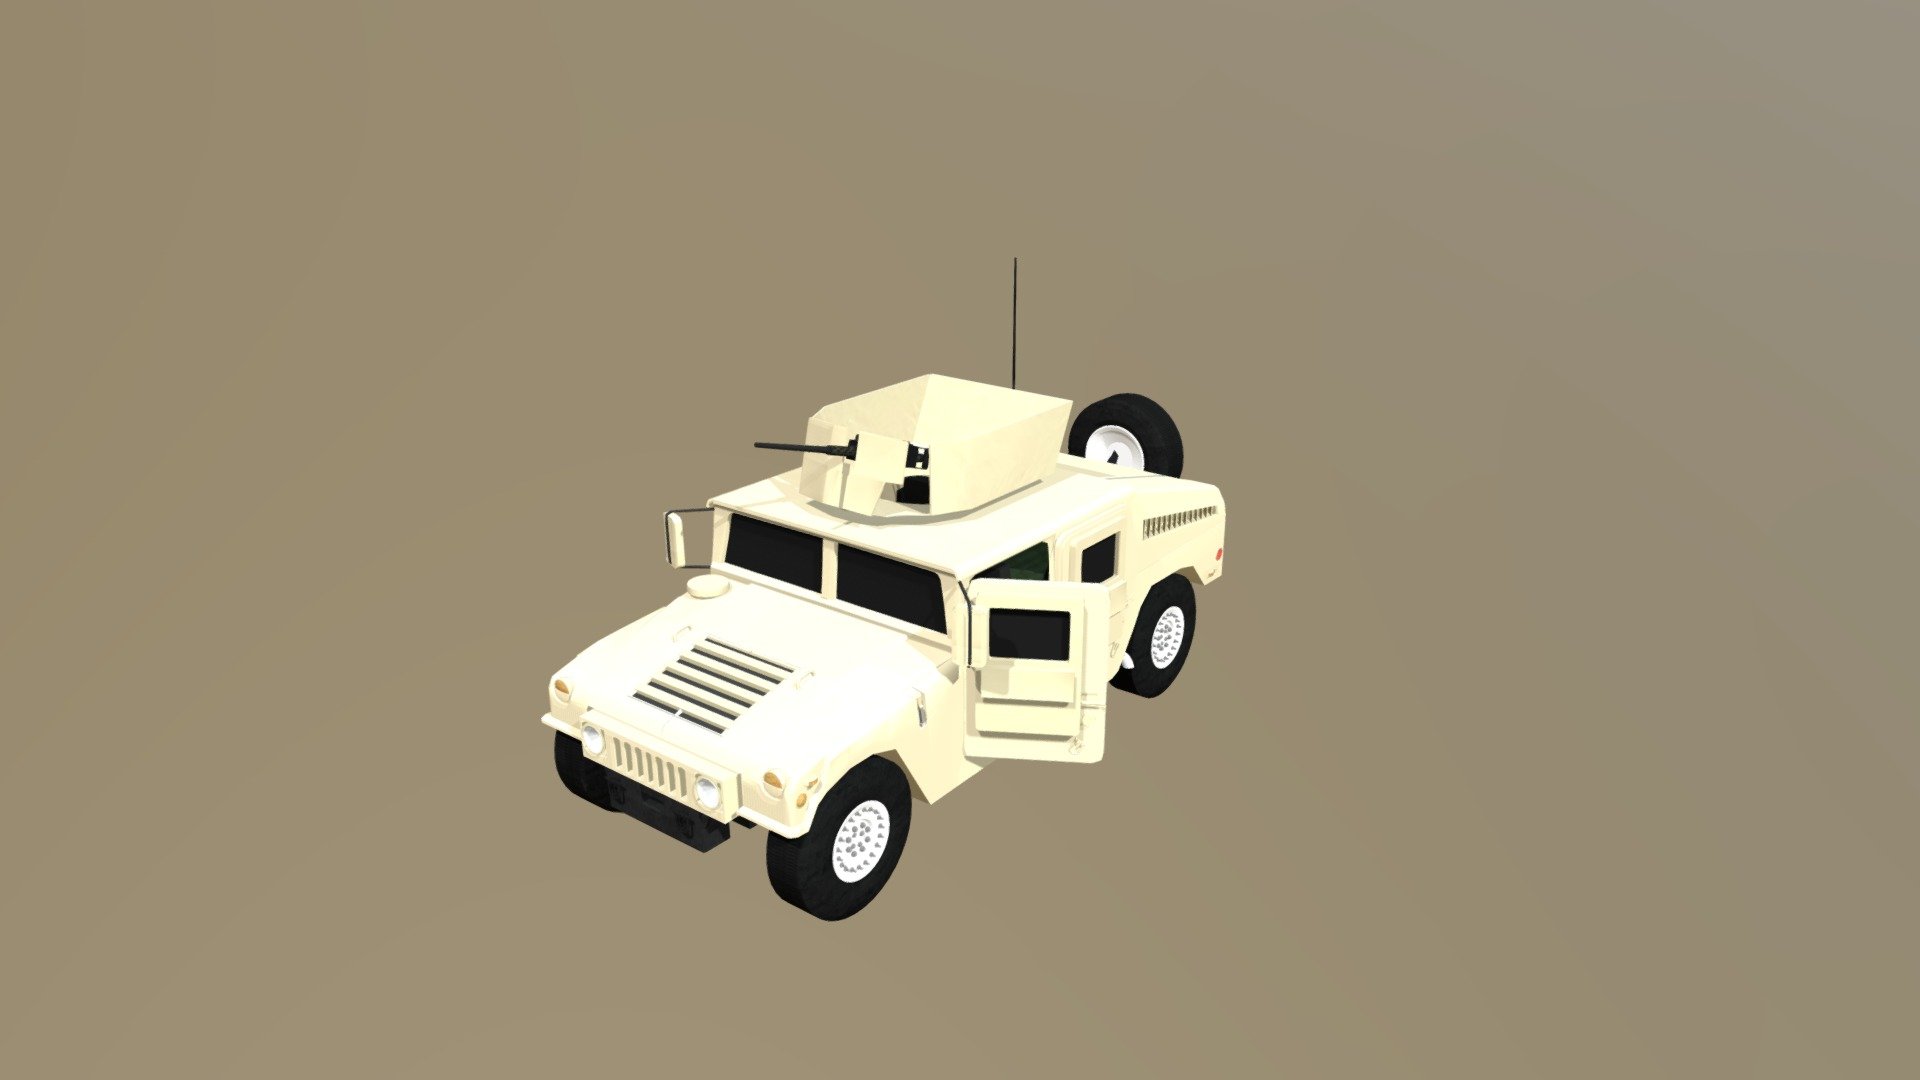 HMMWV Up-Armored